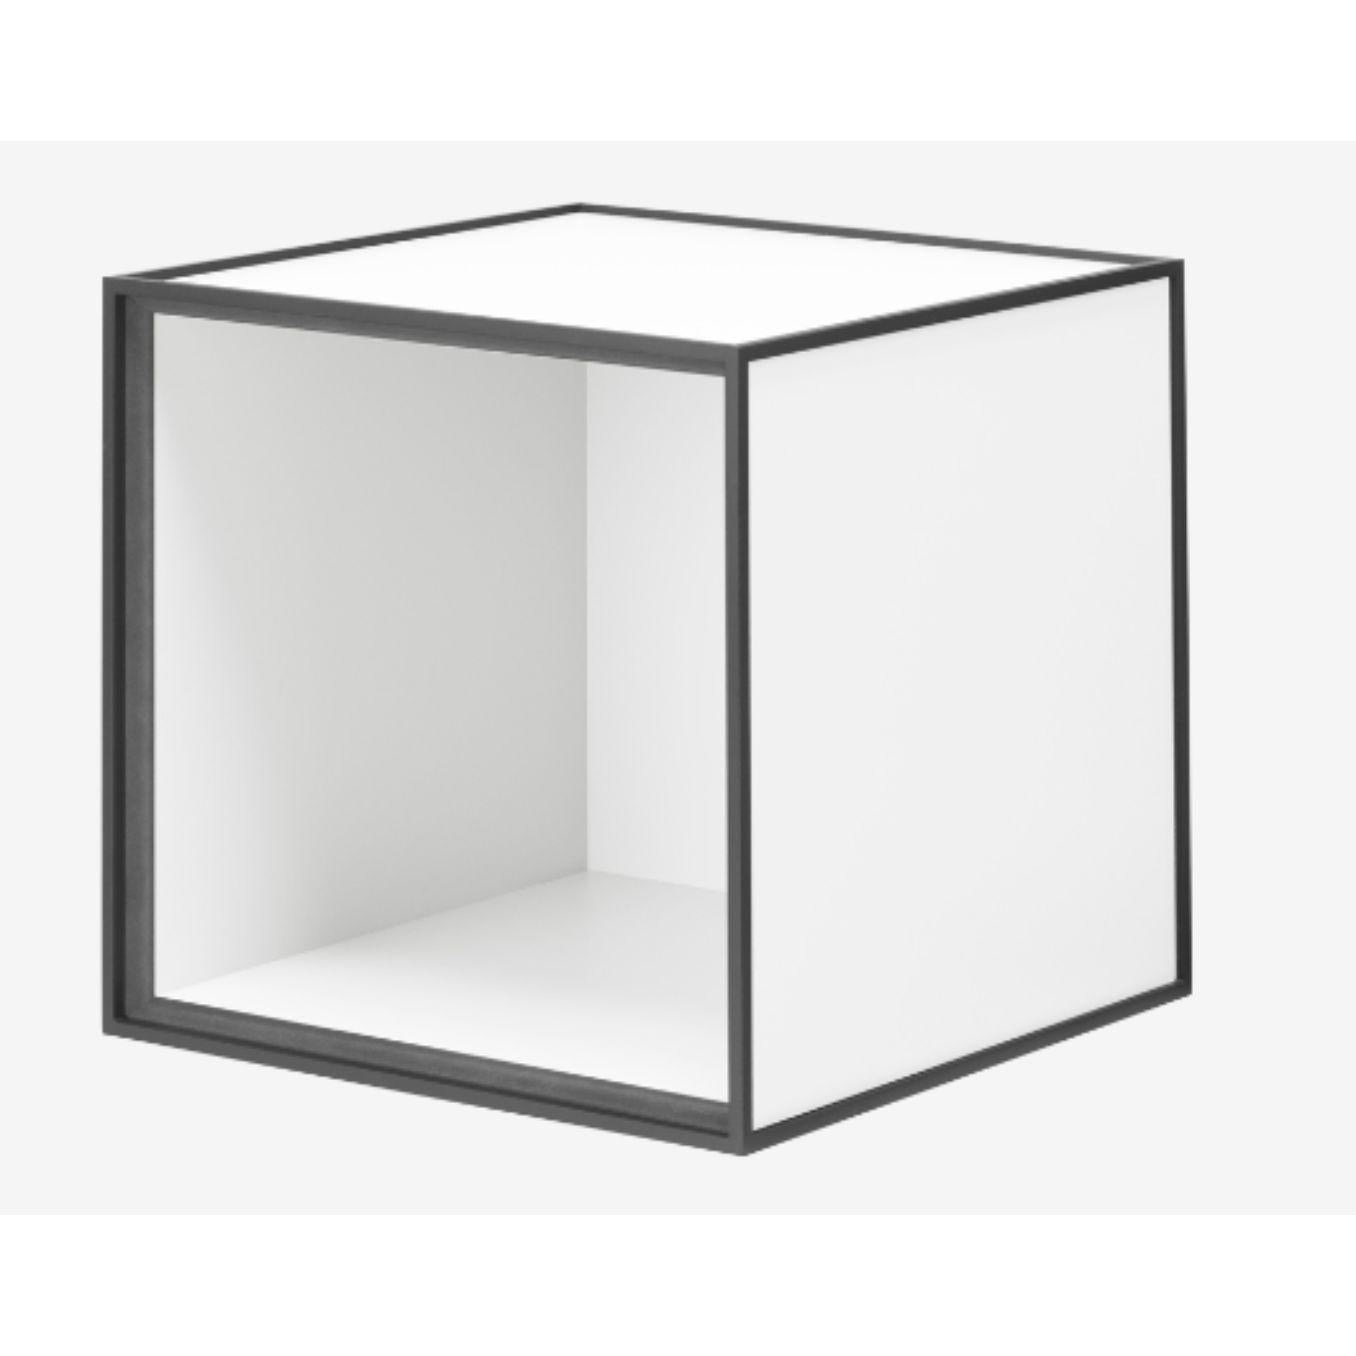 35 white frame box by Lassen.
Dimensions: W 35 x D 35 x H 35 cm 
Materials: Finér, melamin, melamin, melamine, metal, veneer, oak.
Also available in different colors and dimensions. 

By Lassen is a Danish design brand focused on iconic designs